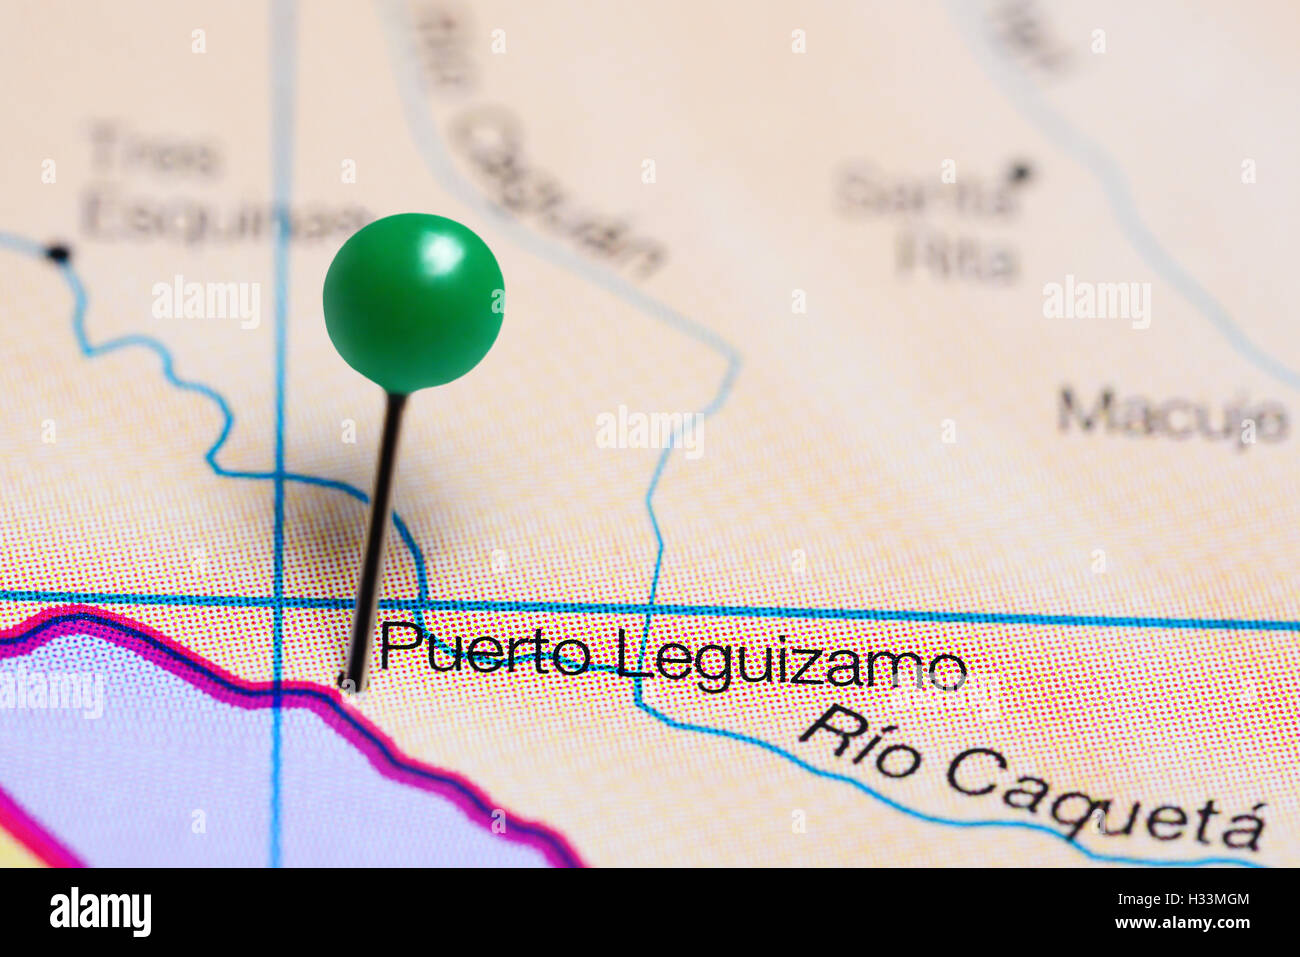 Puerto Leguizamo pinned on a map of Colombia Stock Photo